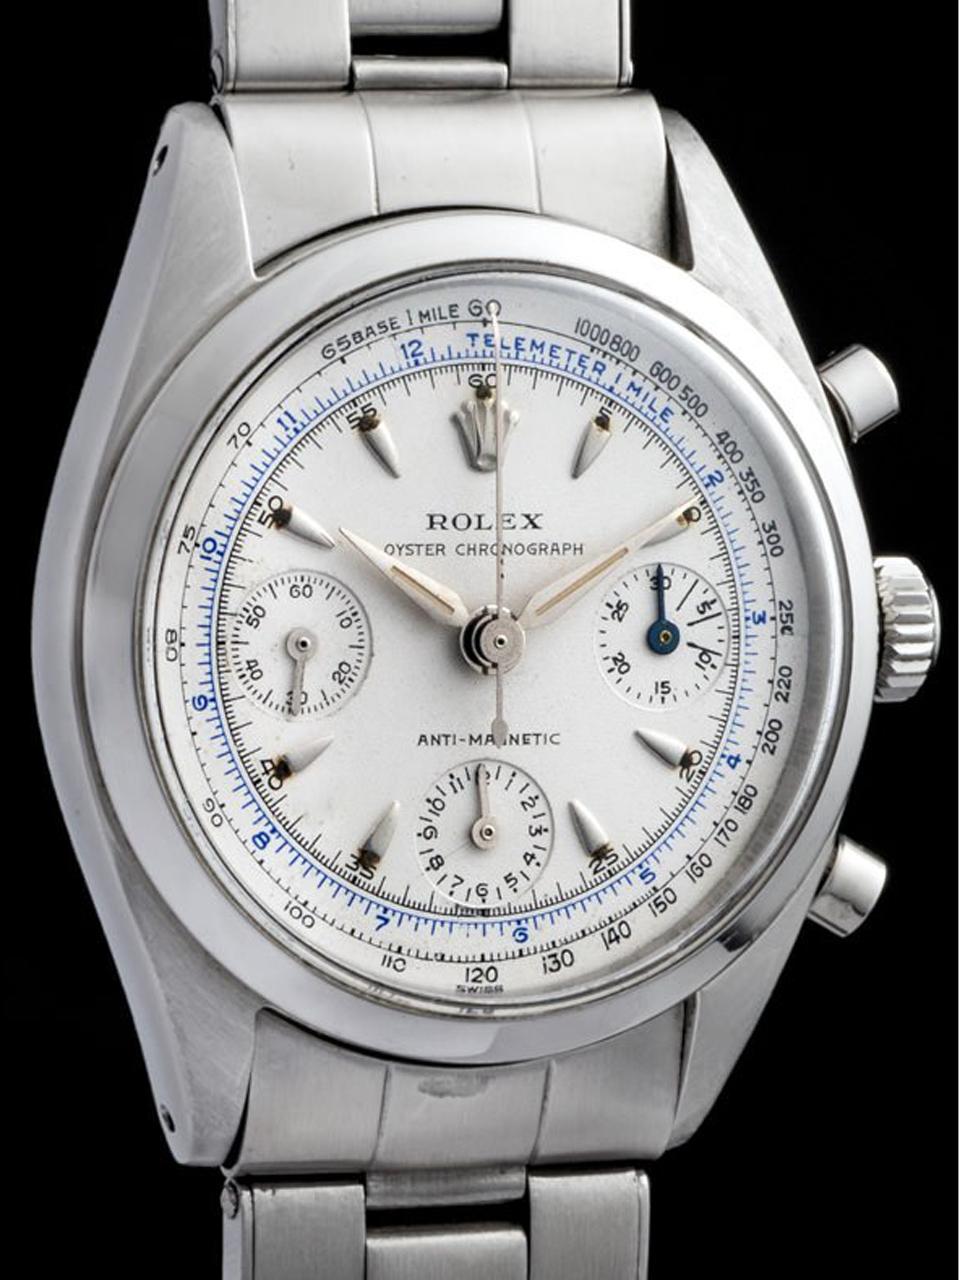 Rolex-oyster-chronograph-6234-21